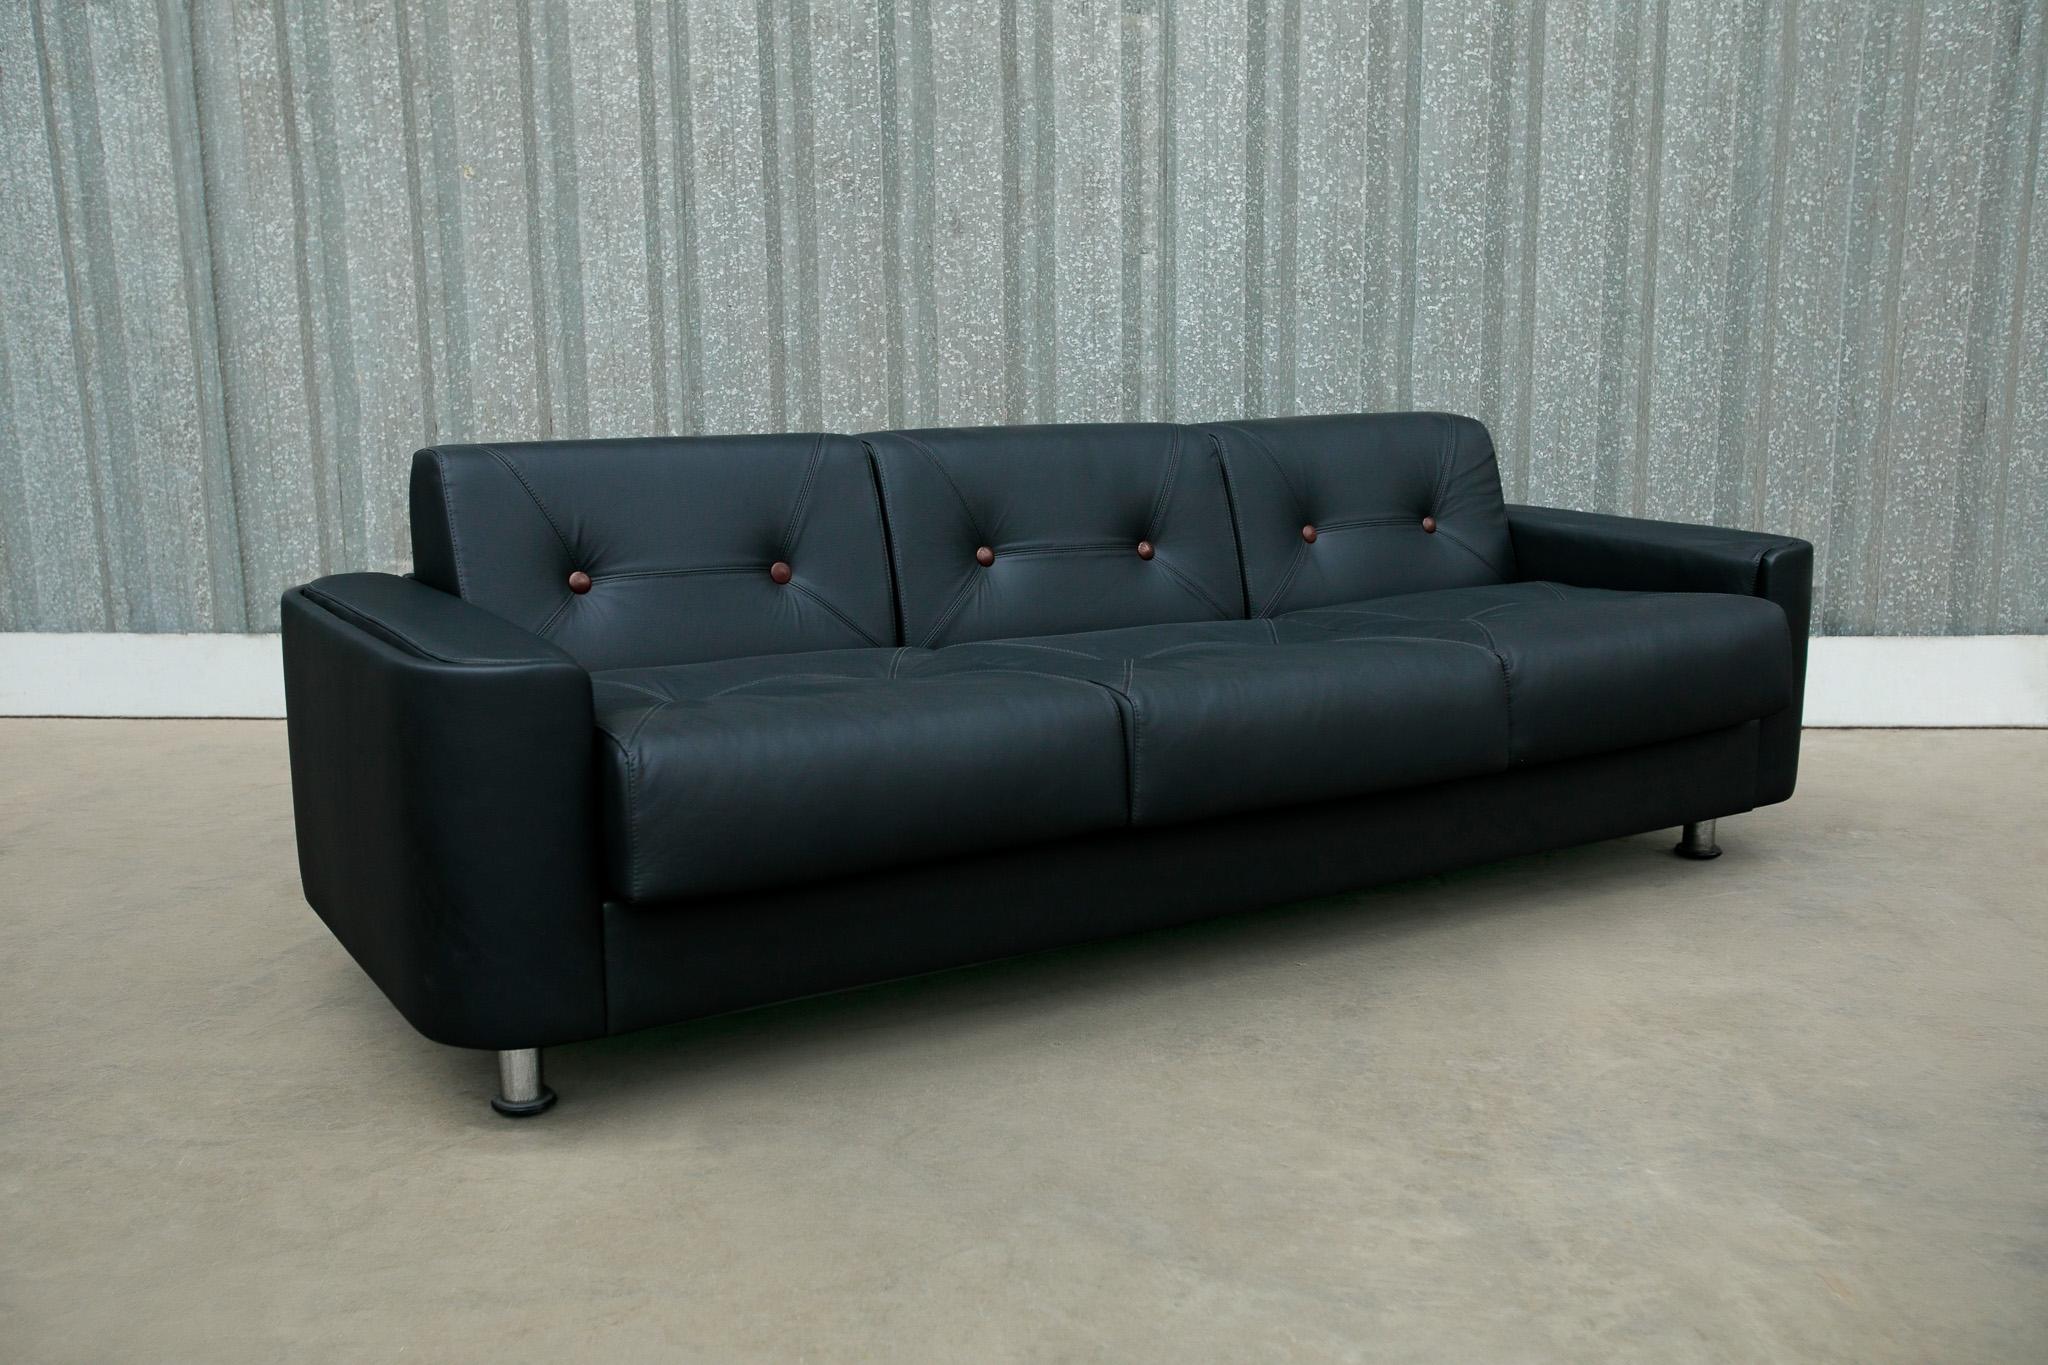 Mid-Century Modern Sofa in Black Leather & Wood by Jorge Zalszupin, Brazil, 1970 For Sale 3